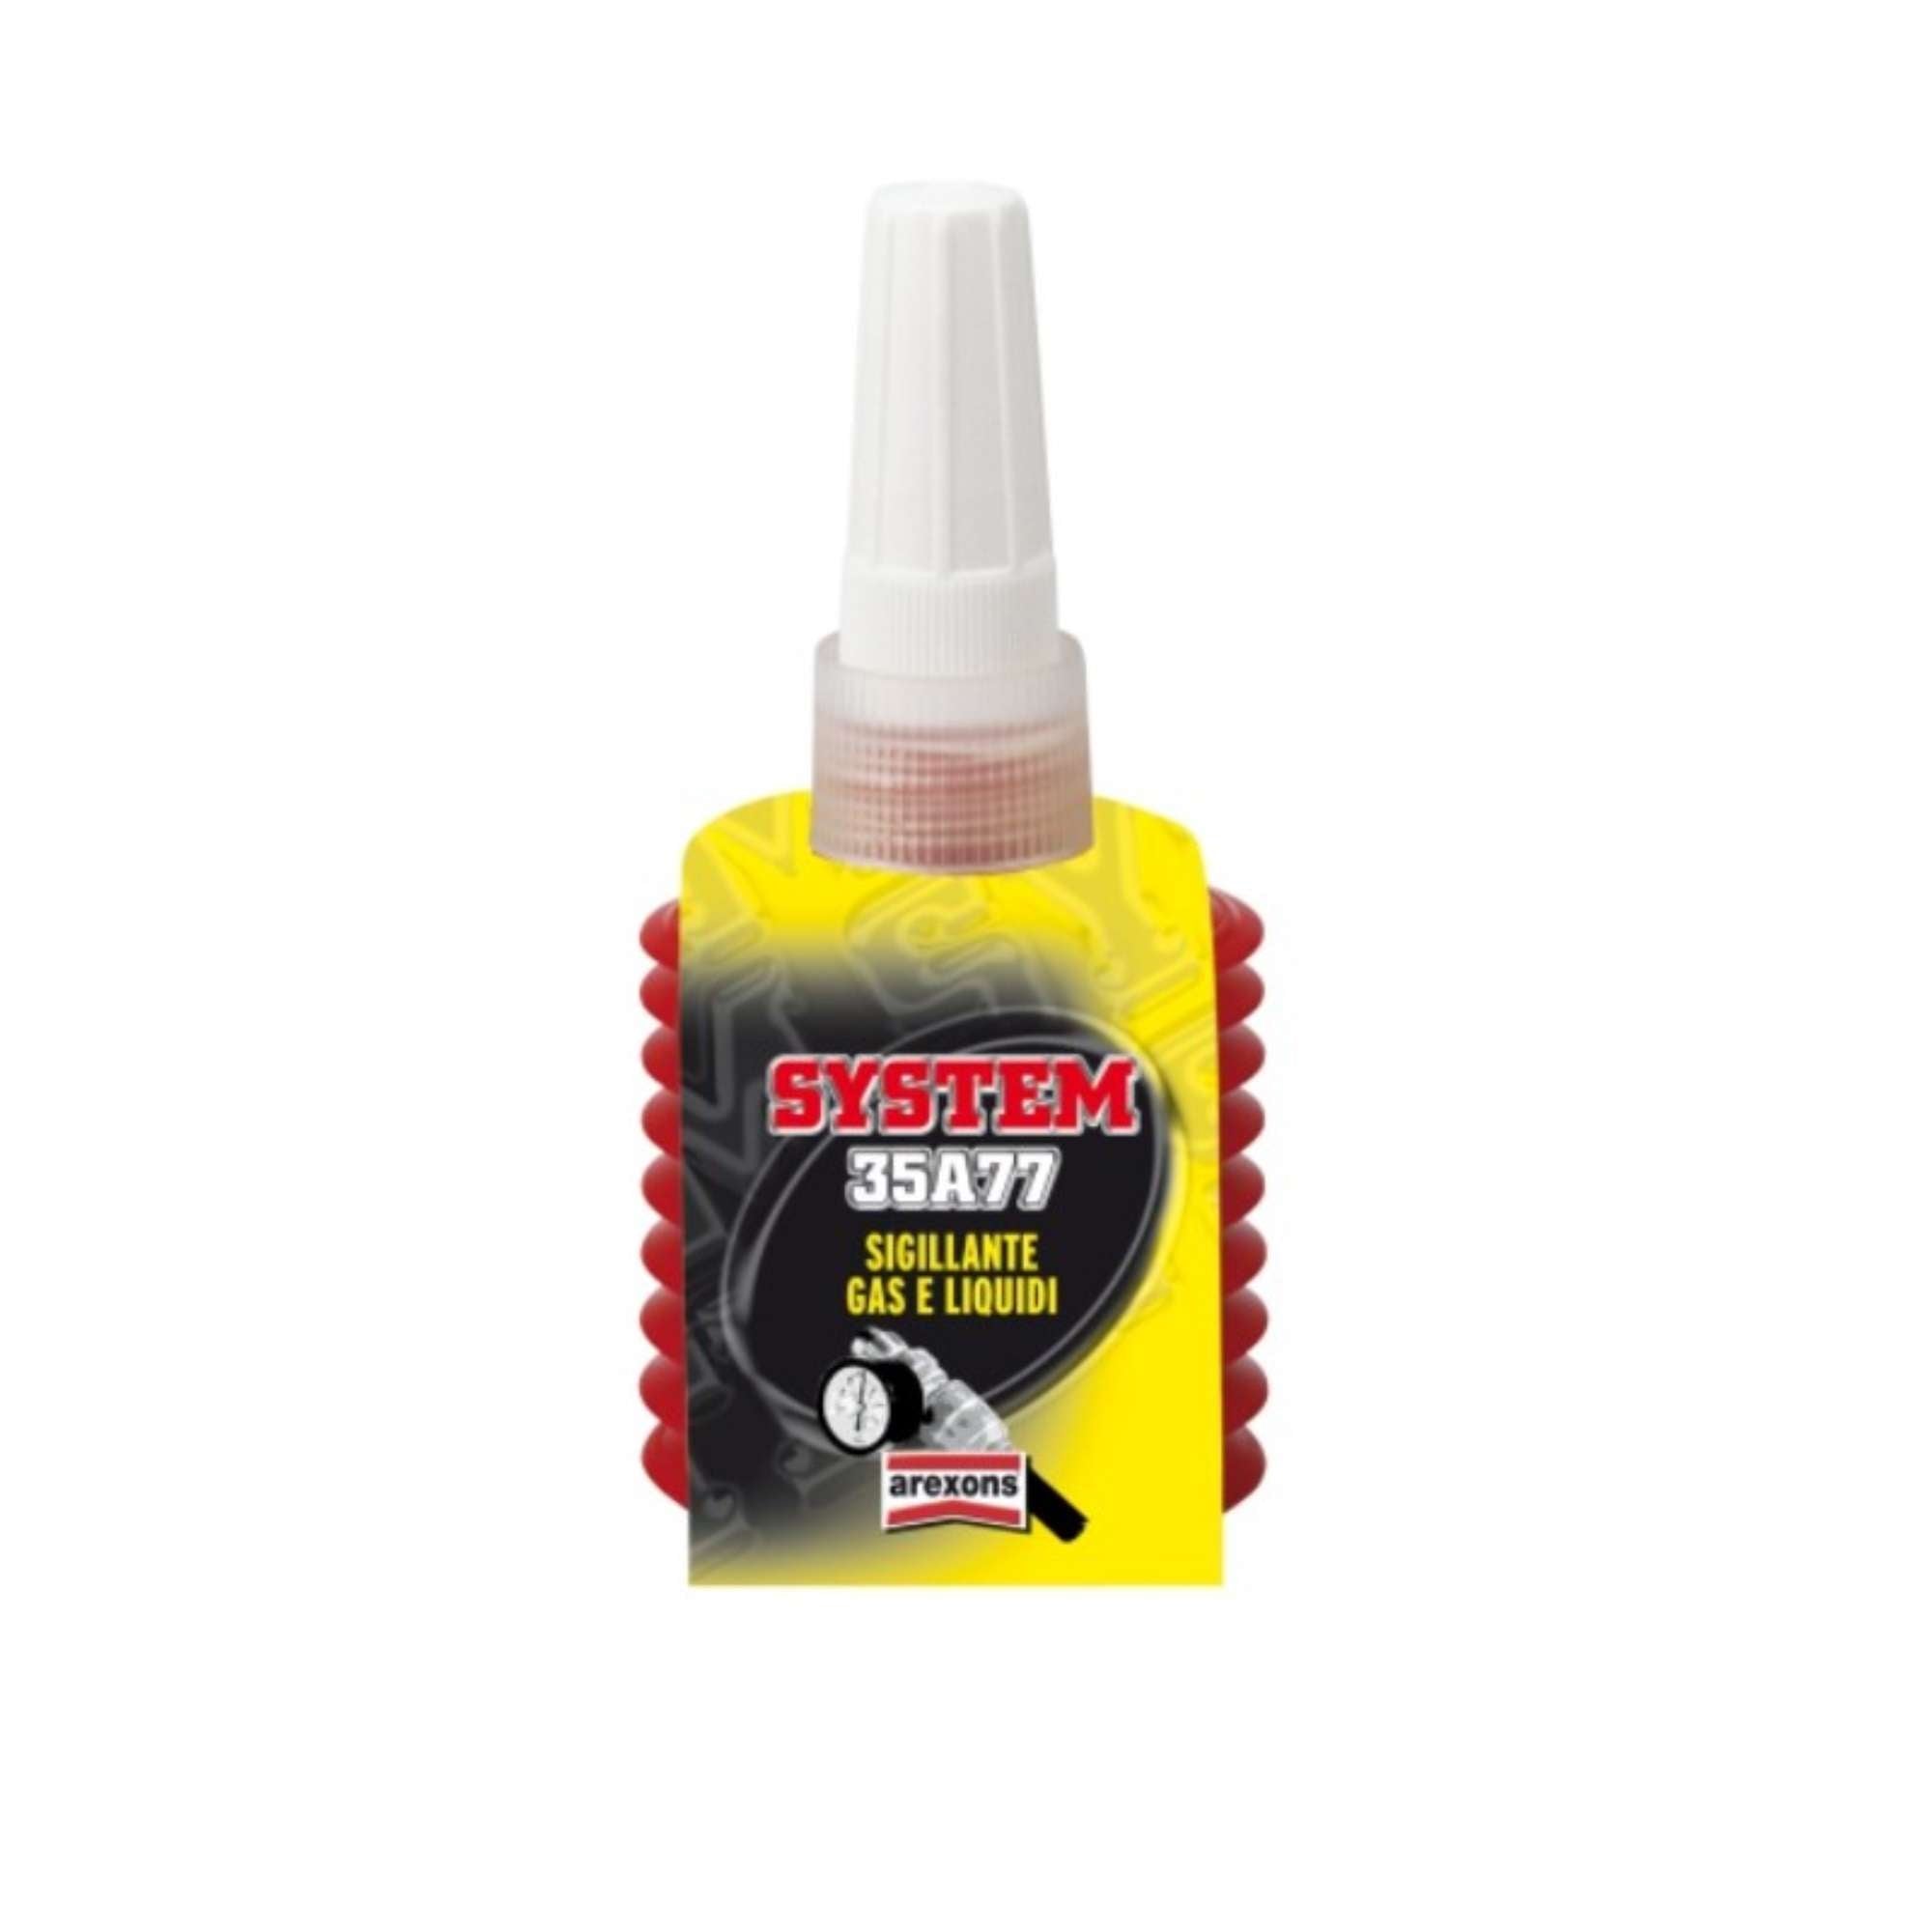 Gas and liquid sealant 35A77 100ml - Arexons 4726